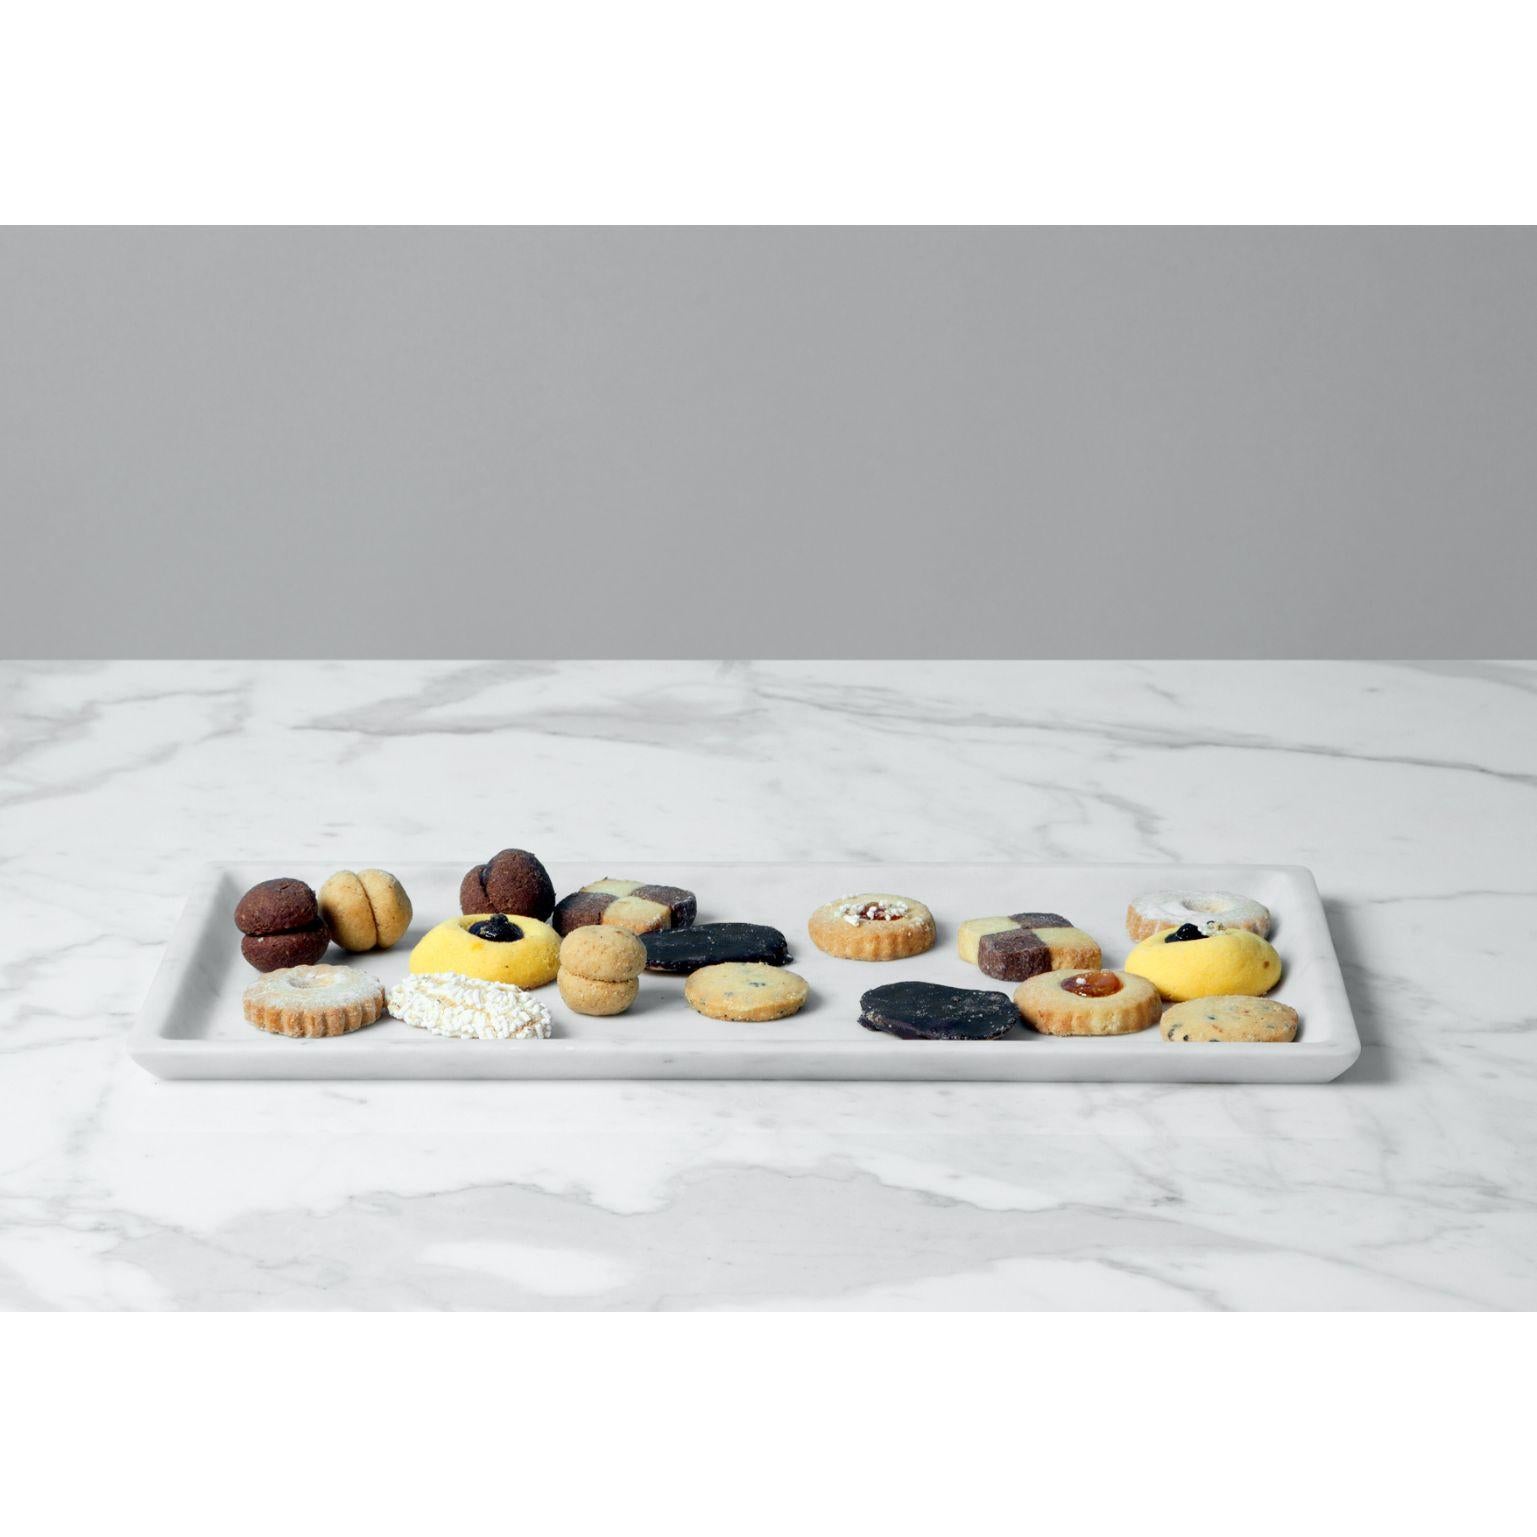 Vasco tray - Calacatta Oro by Studioformart
Total Marble Collection
Dimensions: 40 x 20 x 2 cm
Materials: Calacatta Oro

Also available: Bianco Carrara

The history of marble carving is lost in time; in one breath, it takes us back to the IV